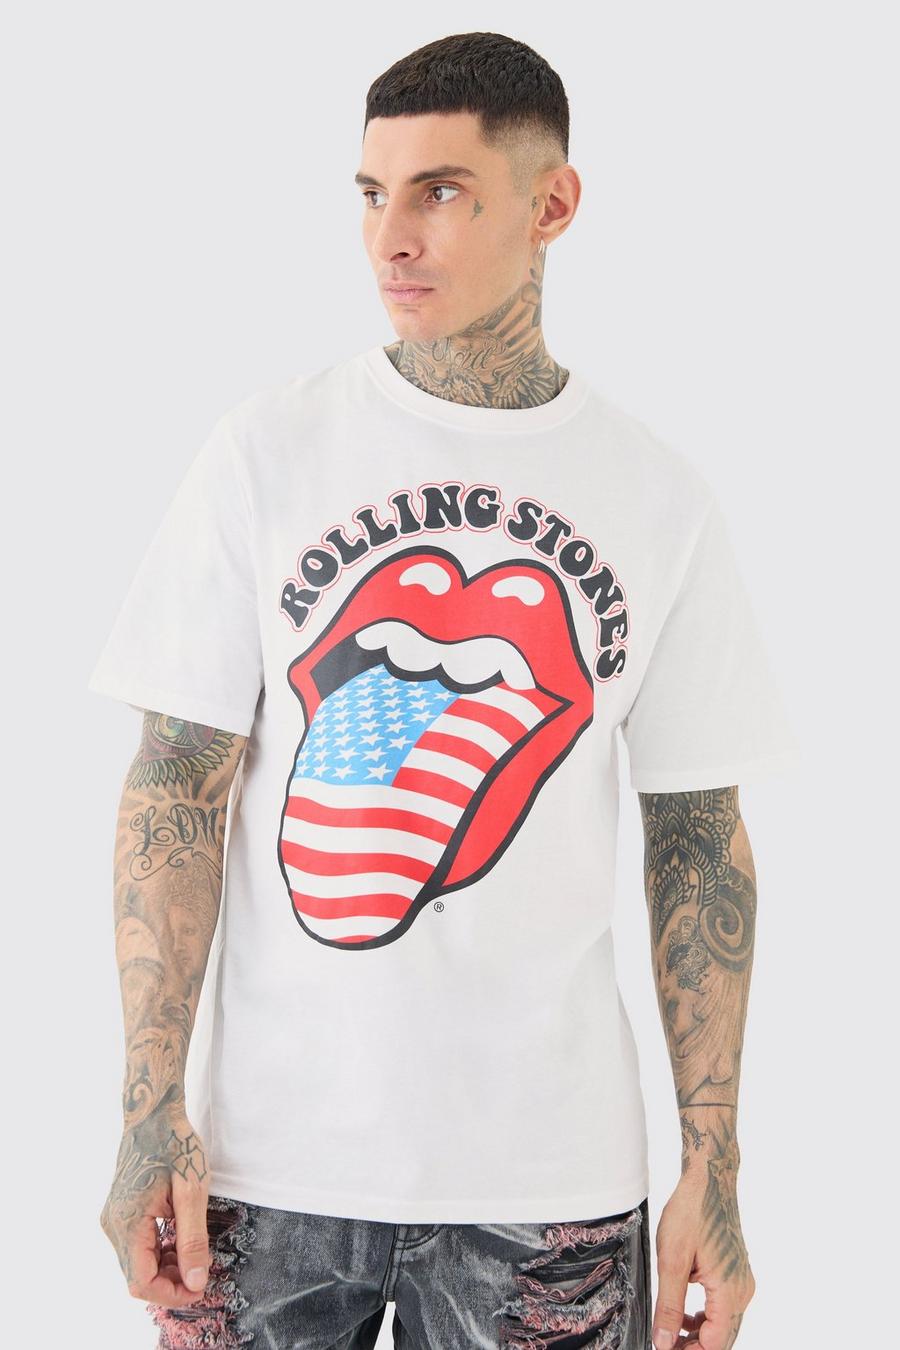 T-shirt Tall oversize ufficiale dei Rolling Stones bianca, White